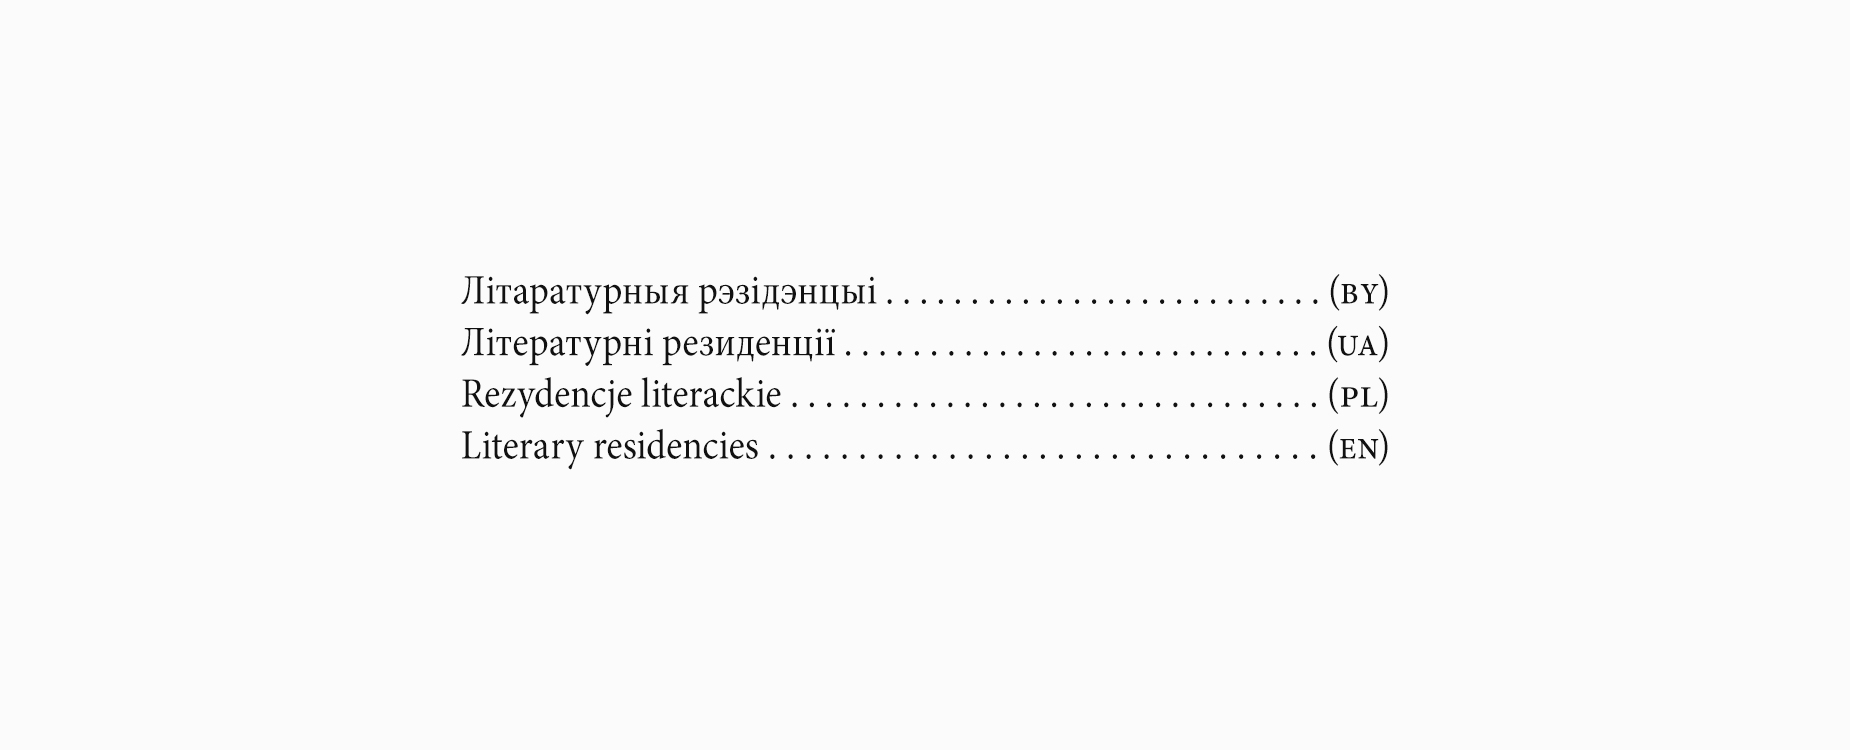 RESULTS OF AN OPEN CALL FOR LITERARY RESIDENCIES IN THE FIRST HALF OF 2023